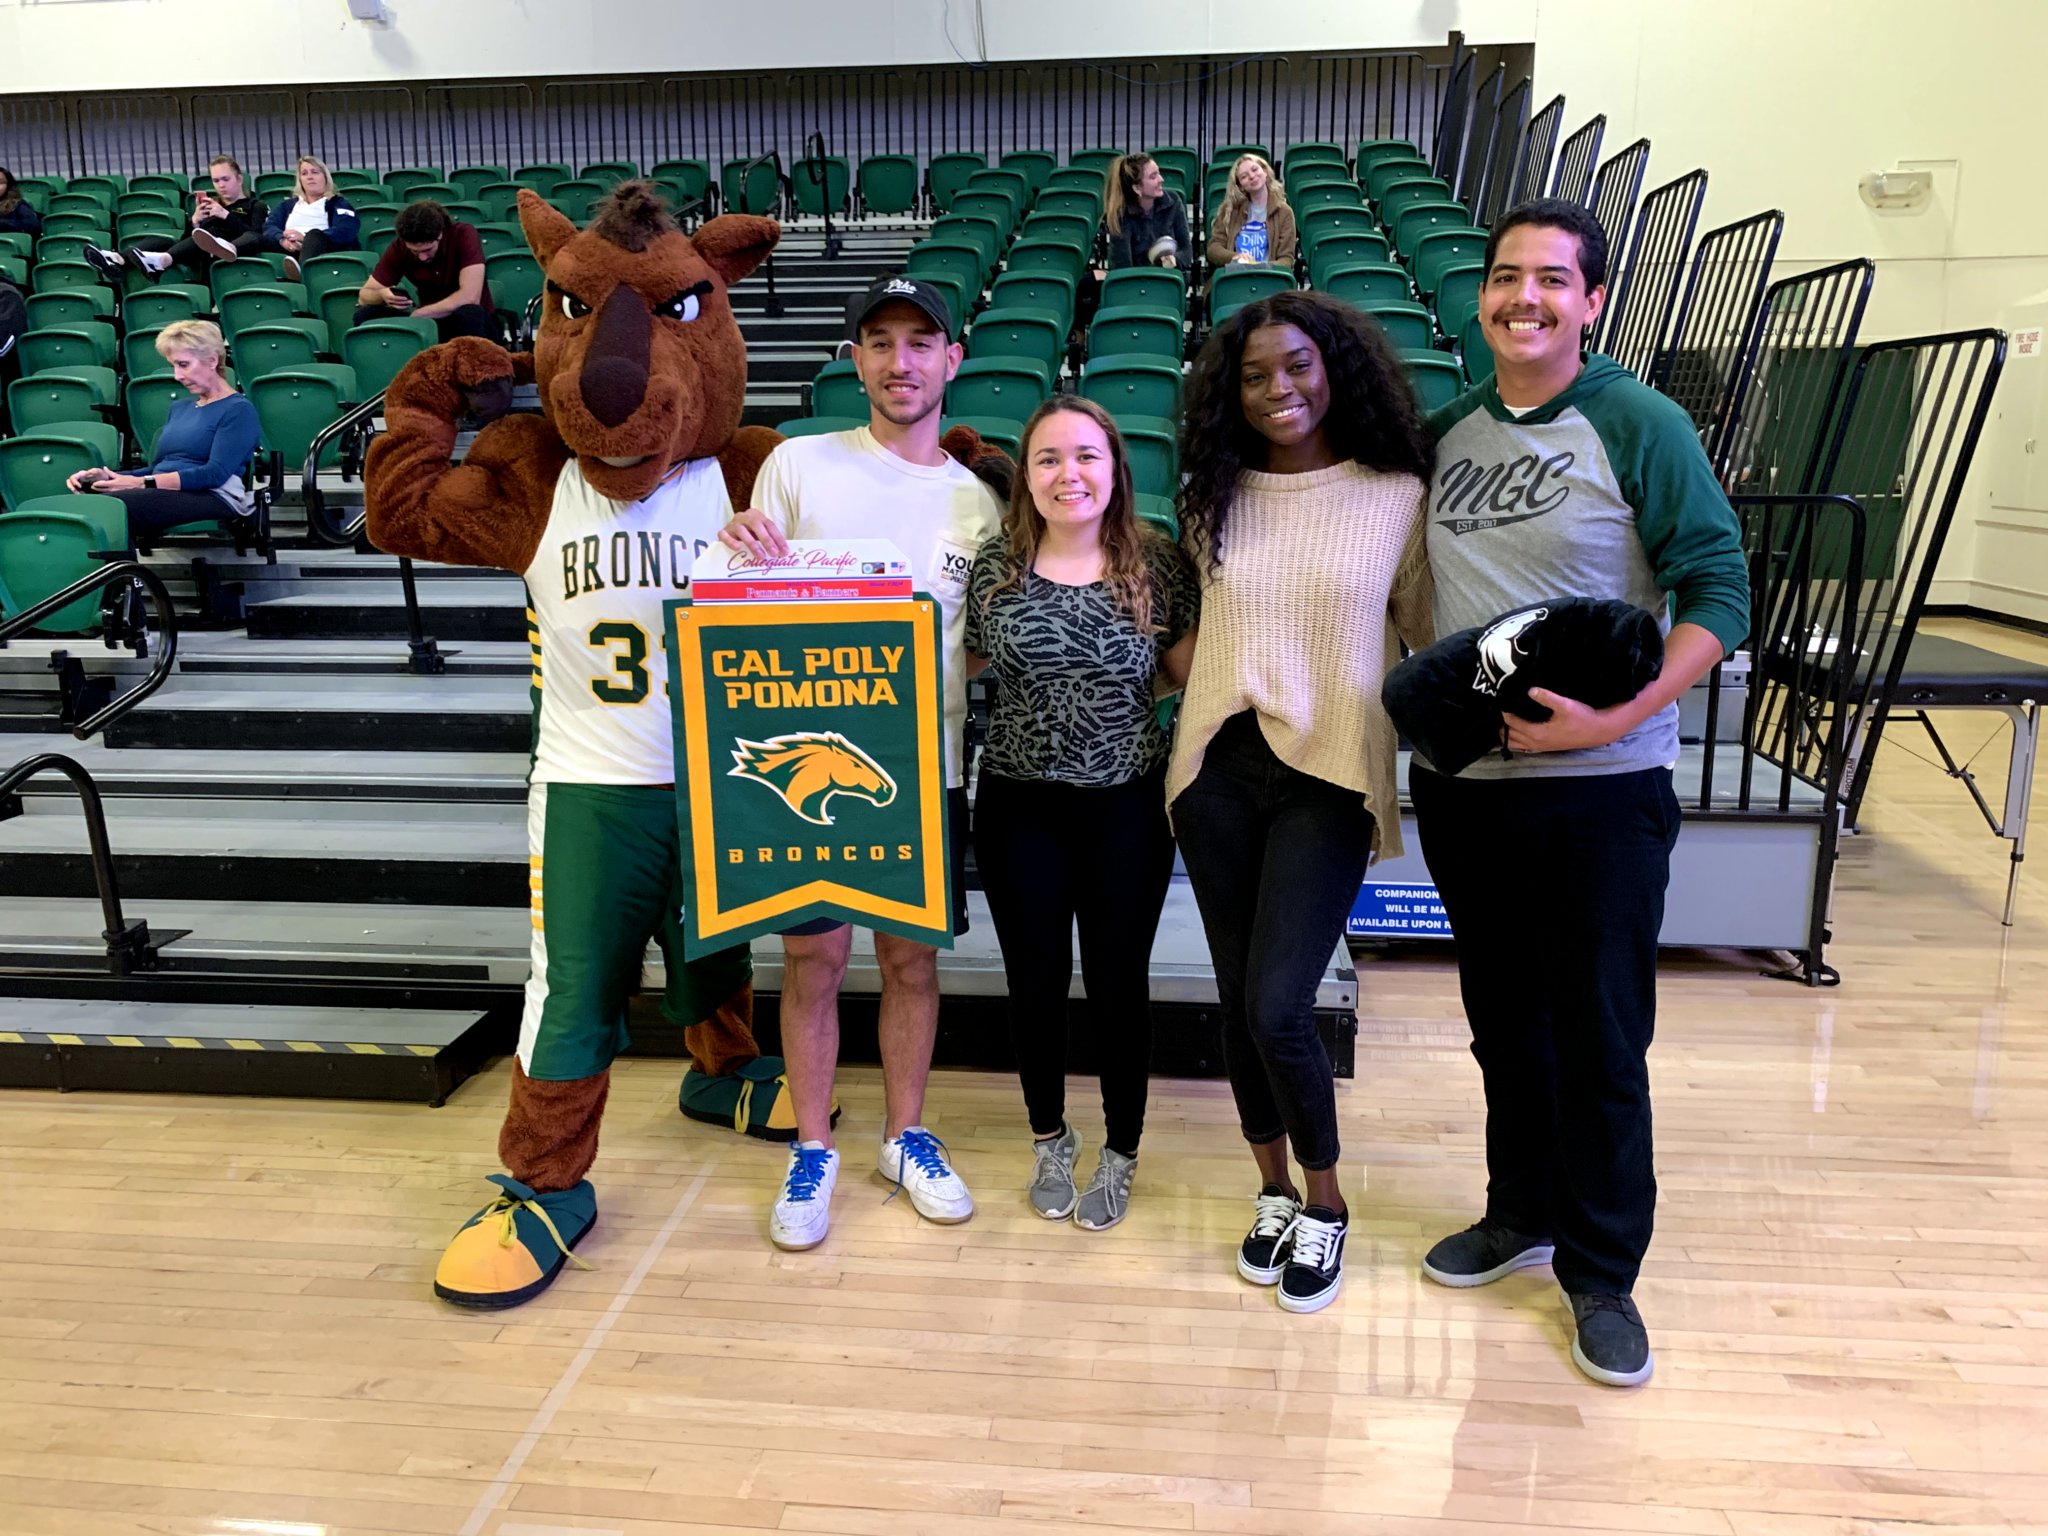 Students pose with Billy Bronco in Kellogg Arena